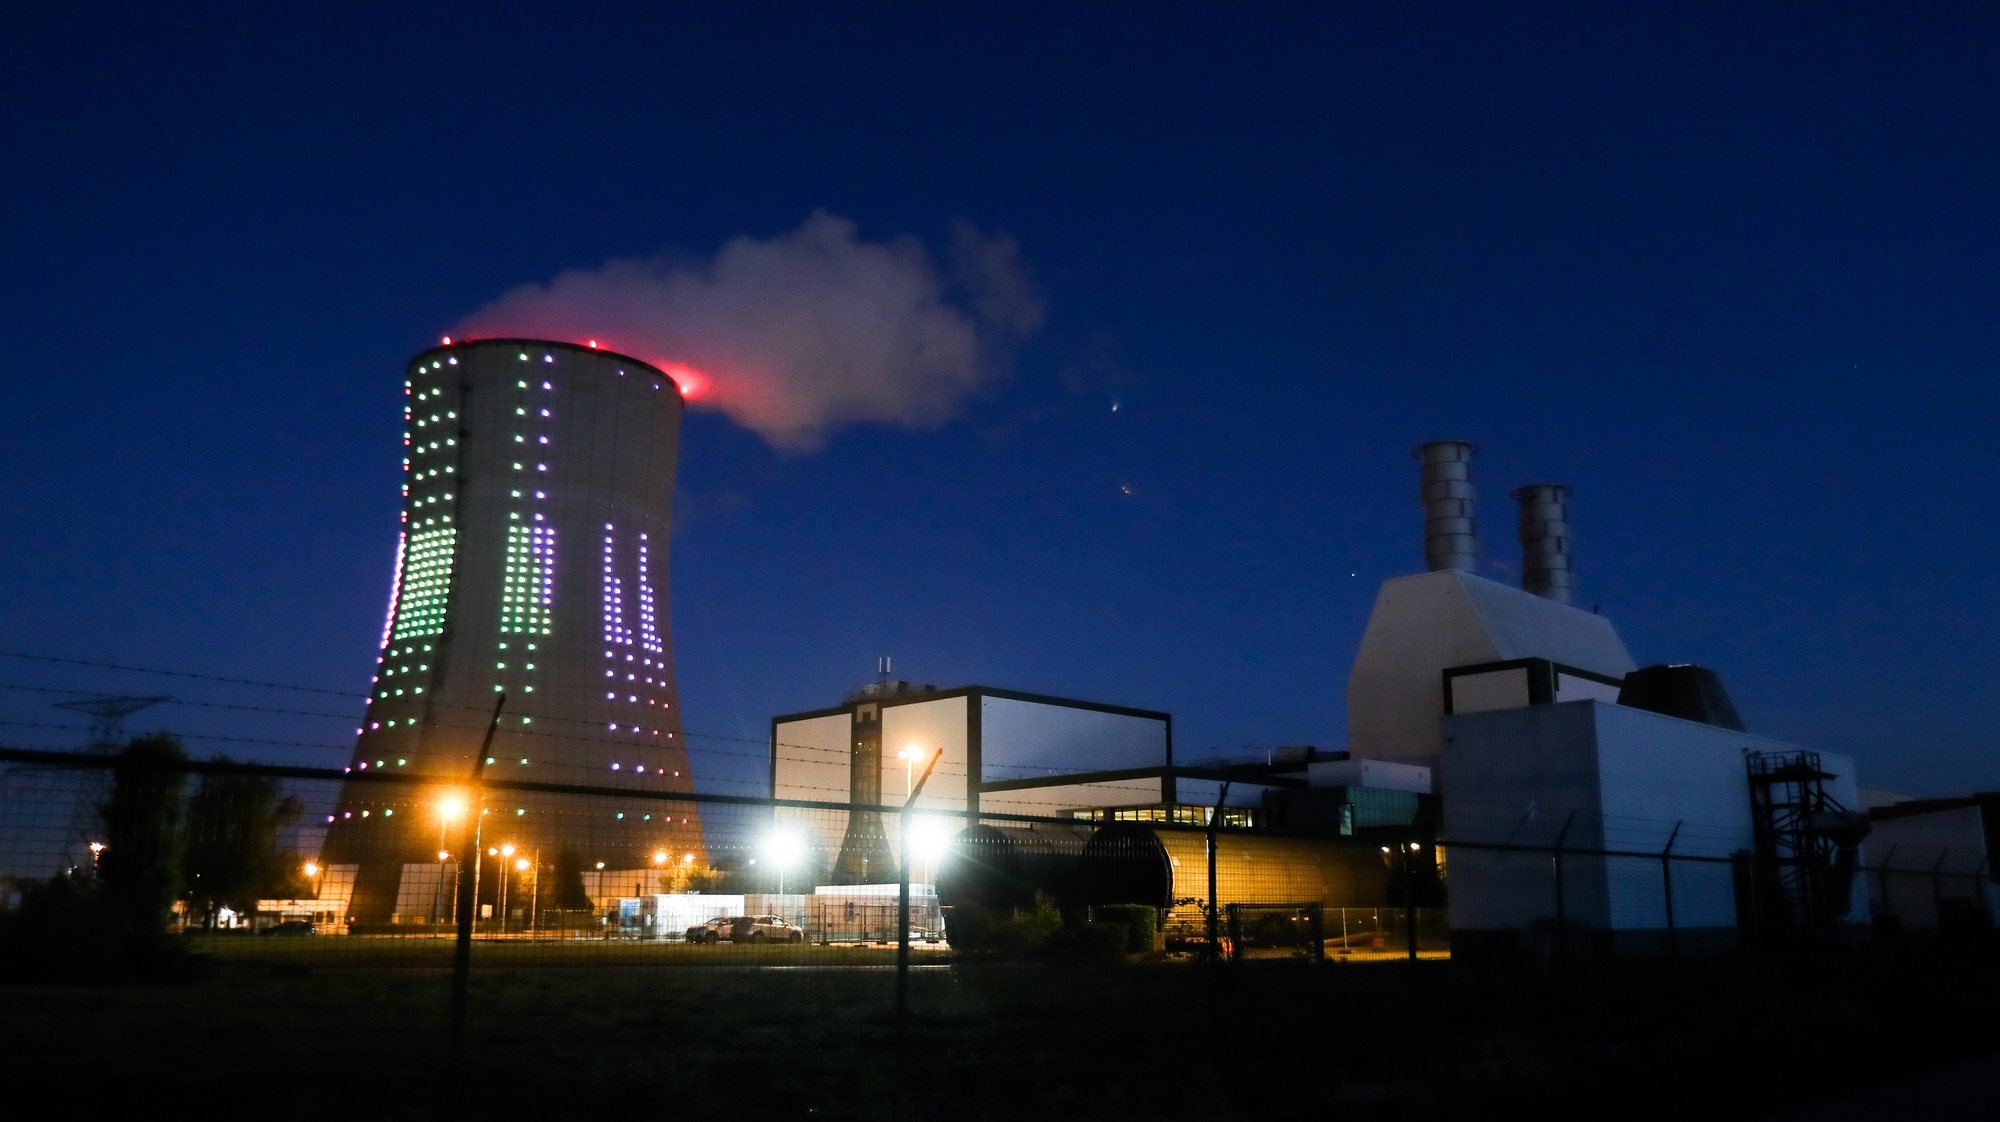 epaselect epa07044043 An exterior view of the Centrale Drogenbos natural gas electricity power plant with its illuminated cooling tower, in Drogenbos, near Brussels, Belgium, 24 September 2018 evening. Belgian energy supplier &#039;Electrabel&#039; had announced on 21 September 2018, that it was pushing back the reactivation of its two Tihange 2 and Tihange 3 nuclear reactors, respectively in March and in June 2019. Three others, also at the stop - Doel 1, 2 and 4, will be relaunched December 10, 31 and 15 respectively. Currently, Belgium only runs two reactors Doel 3 and Tihange 1. But from October 20 to November 29, it will also be stopped to recharge its fuel, resulting in the announcement of a possible shortage of electricity. To secure a sufficient amount of electricity &#039;Electrabel&#039; said they could quickly restart its gas-fired plants in case of a shortage.  EPA/STEPHANIE LECOCQ